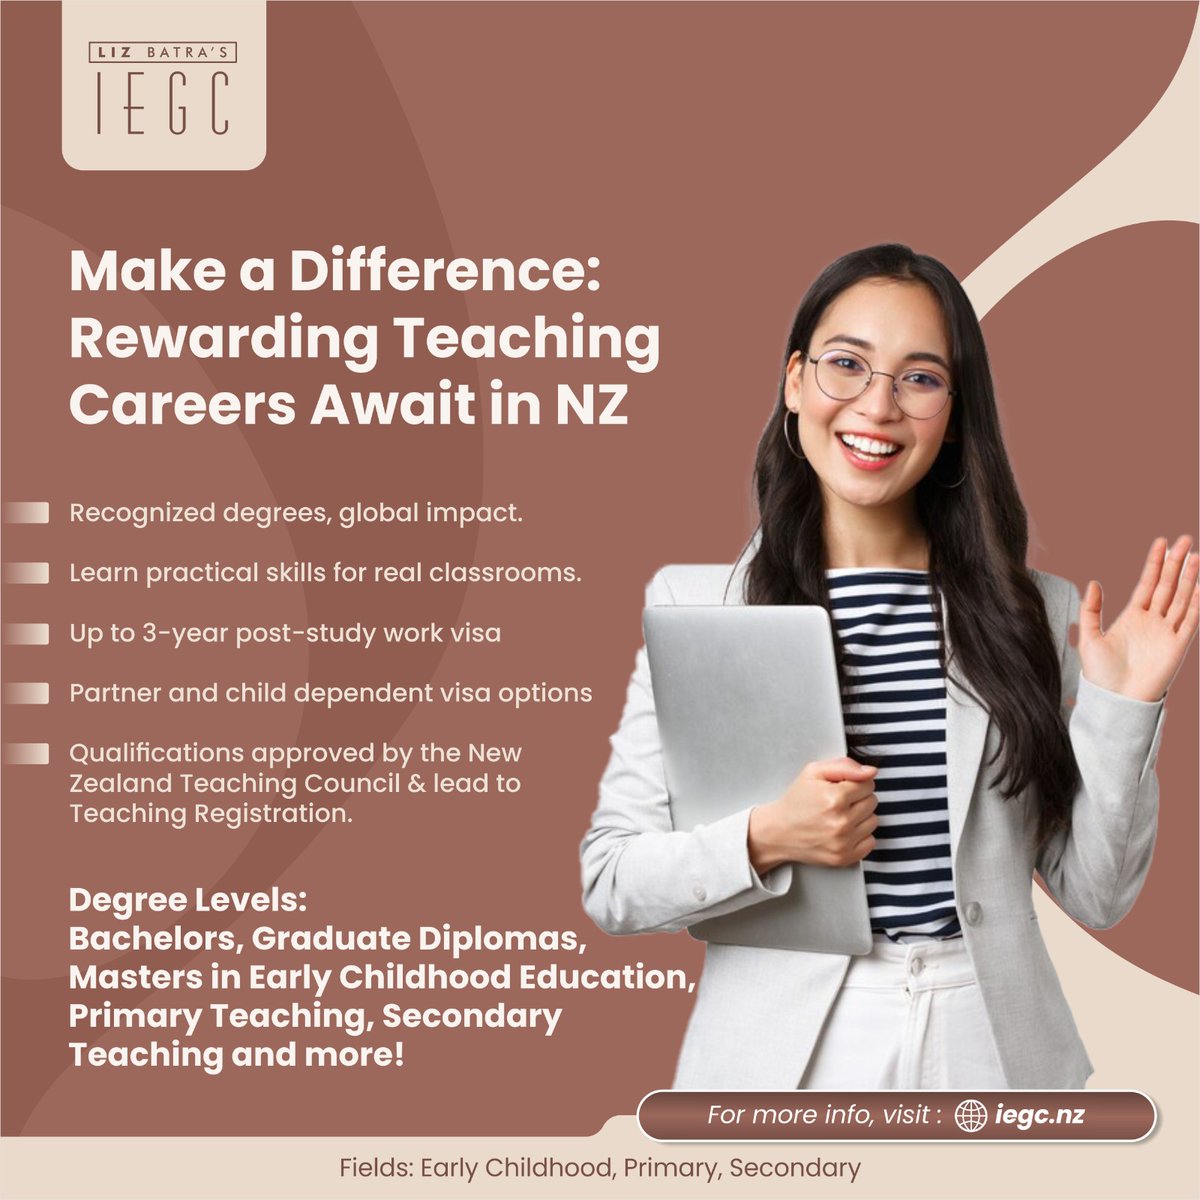 Inspire young minds and make a difference with a rewarding teaching career in New Zealand!

Take the first step towards shaping the future today. Kick-start your meaningful teaching journey in New Zealand.

#lizbatraiegc #educationconsultant #internationalstudent